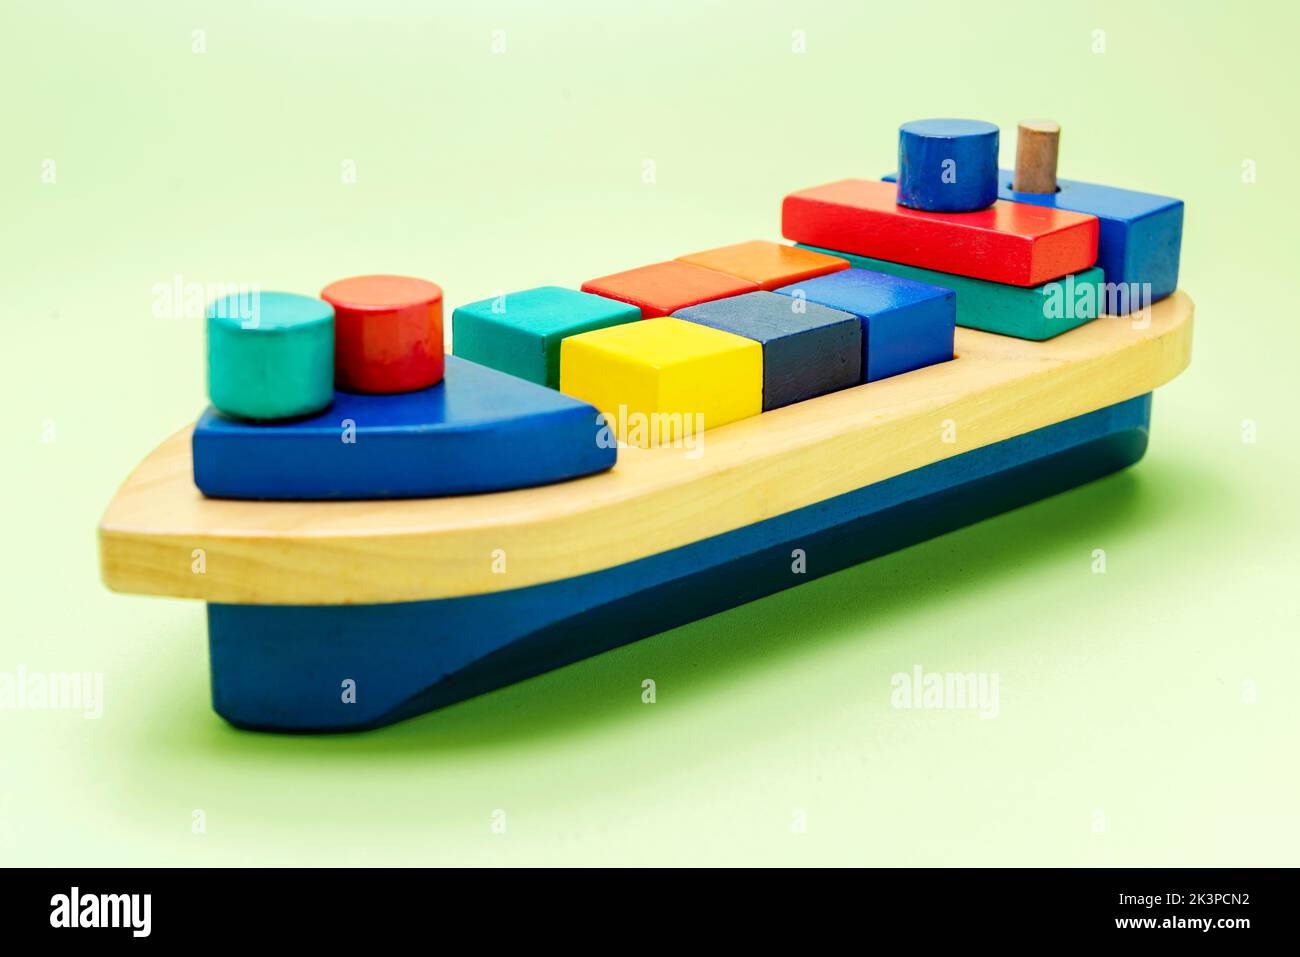 A colorful wooden toy ship on a colored background Stock Photo